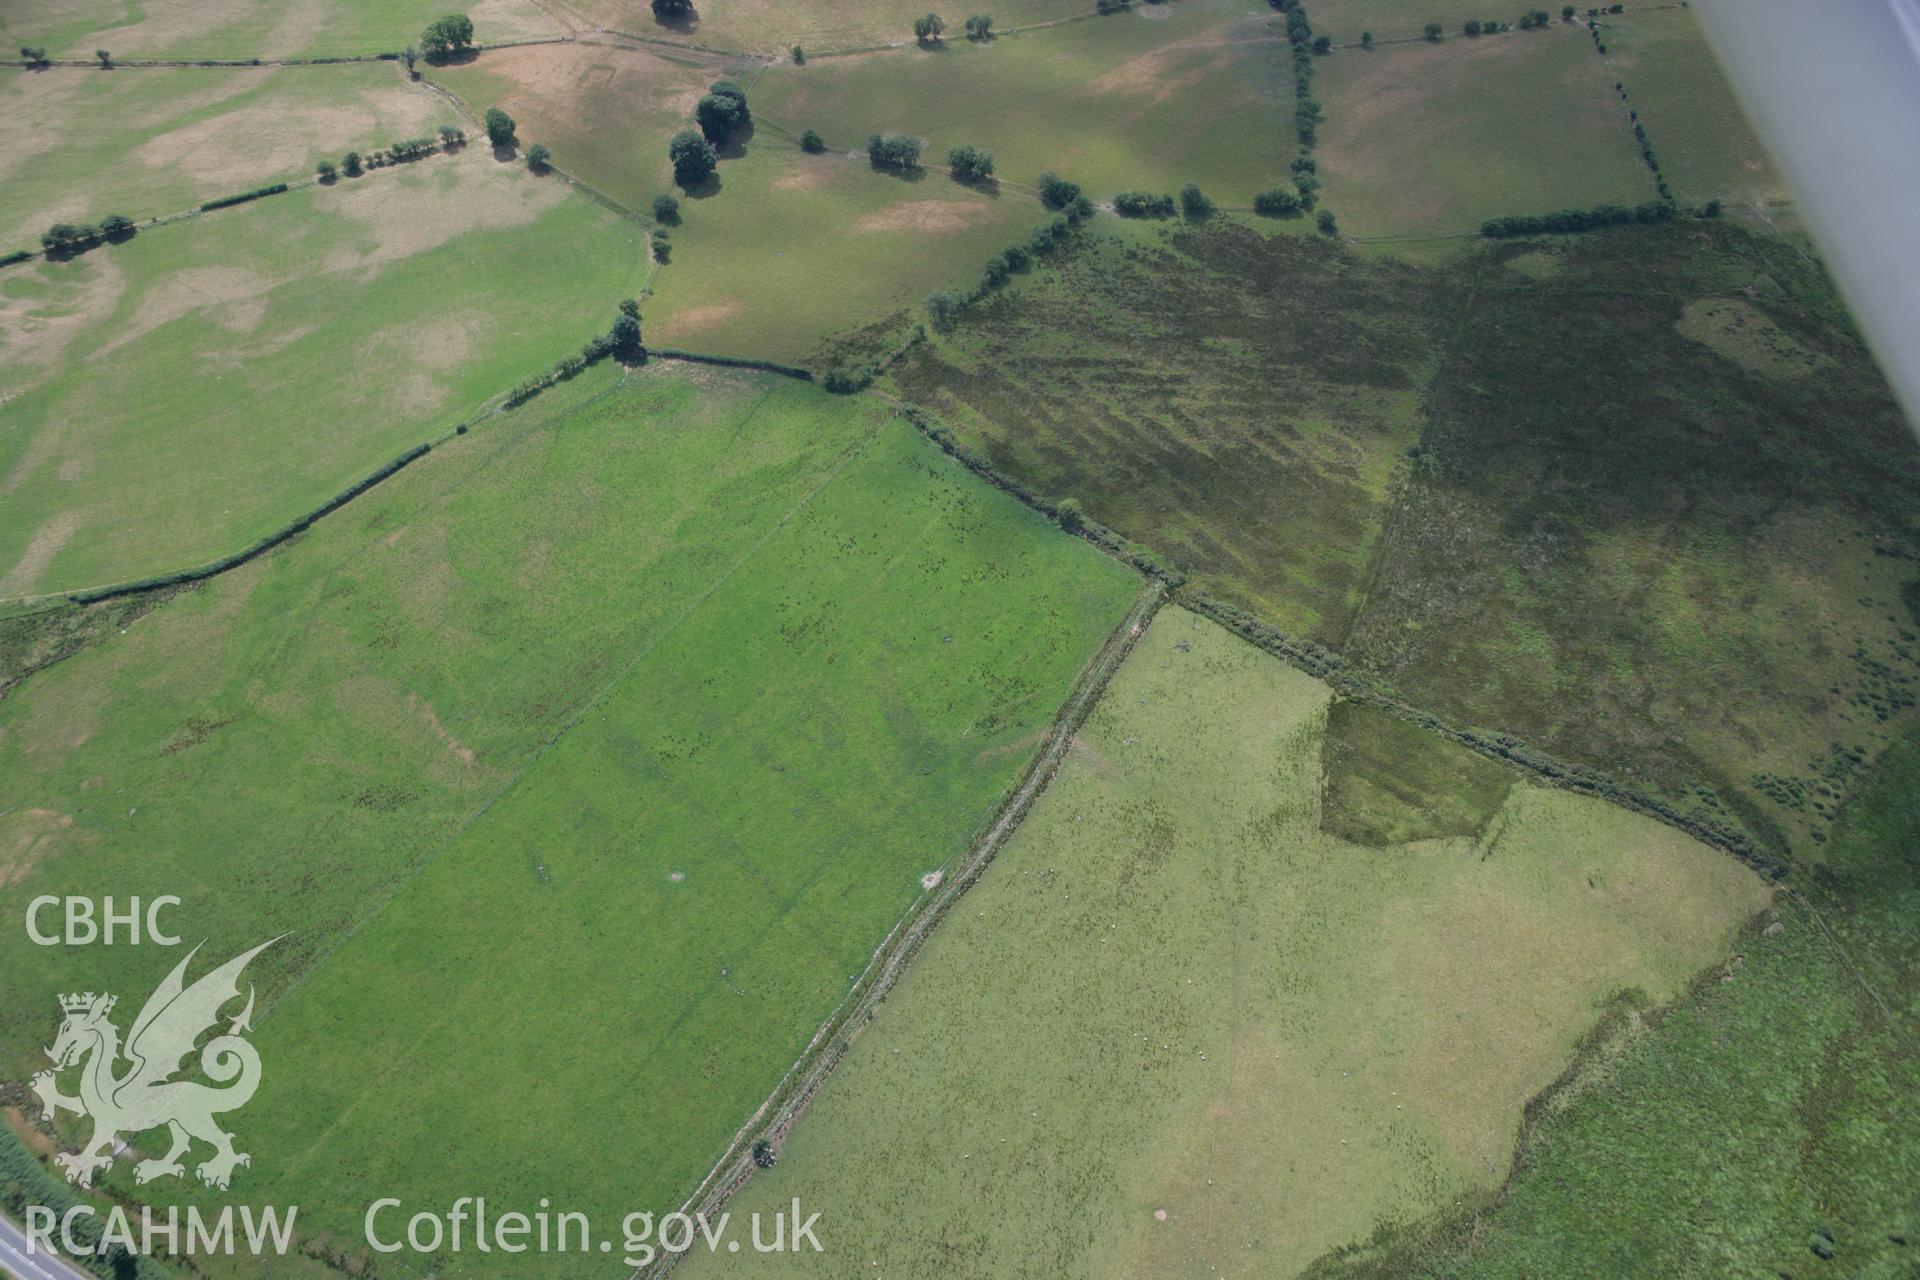 RCAHMW colour oblique aerial photograph of cropmark enclosures to the west of Caerau. Taken on 27 July 2006 by Toby Driver